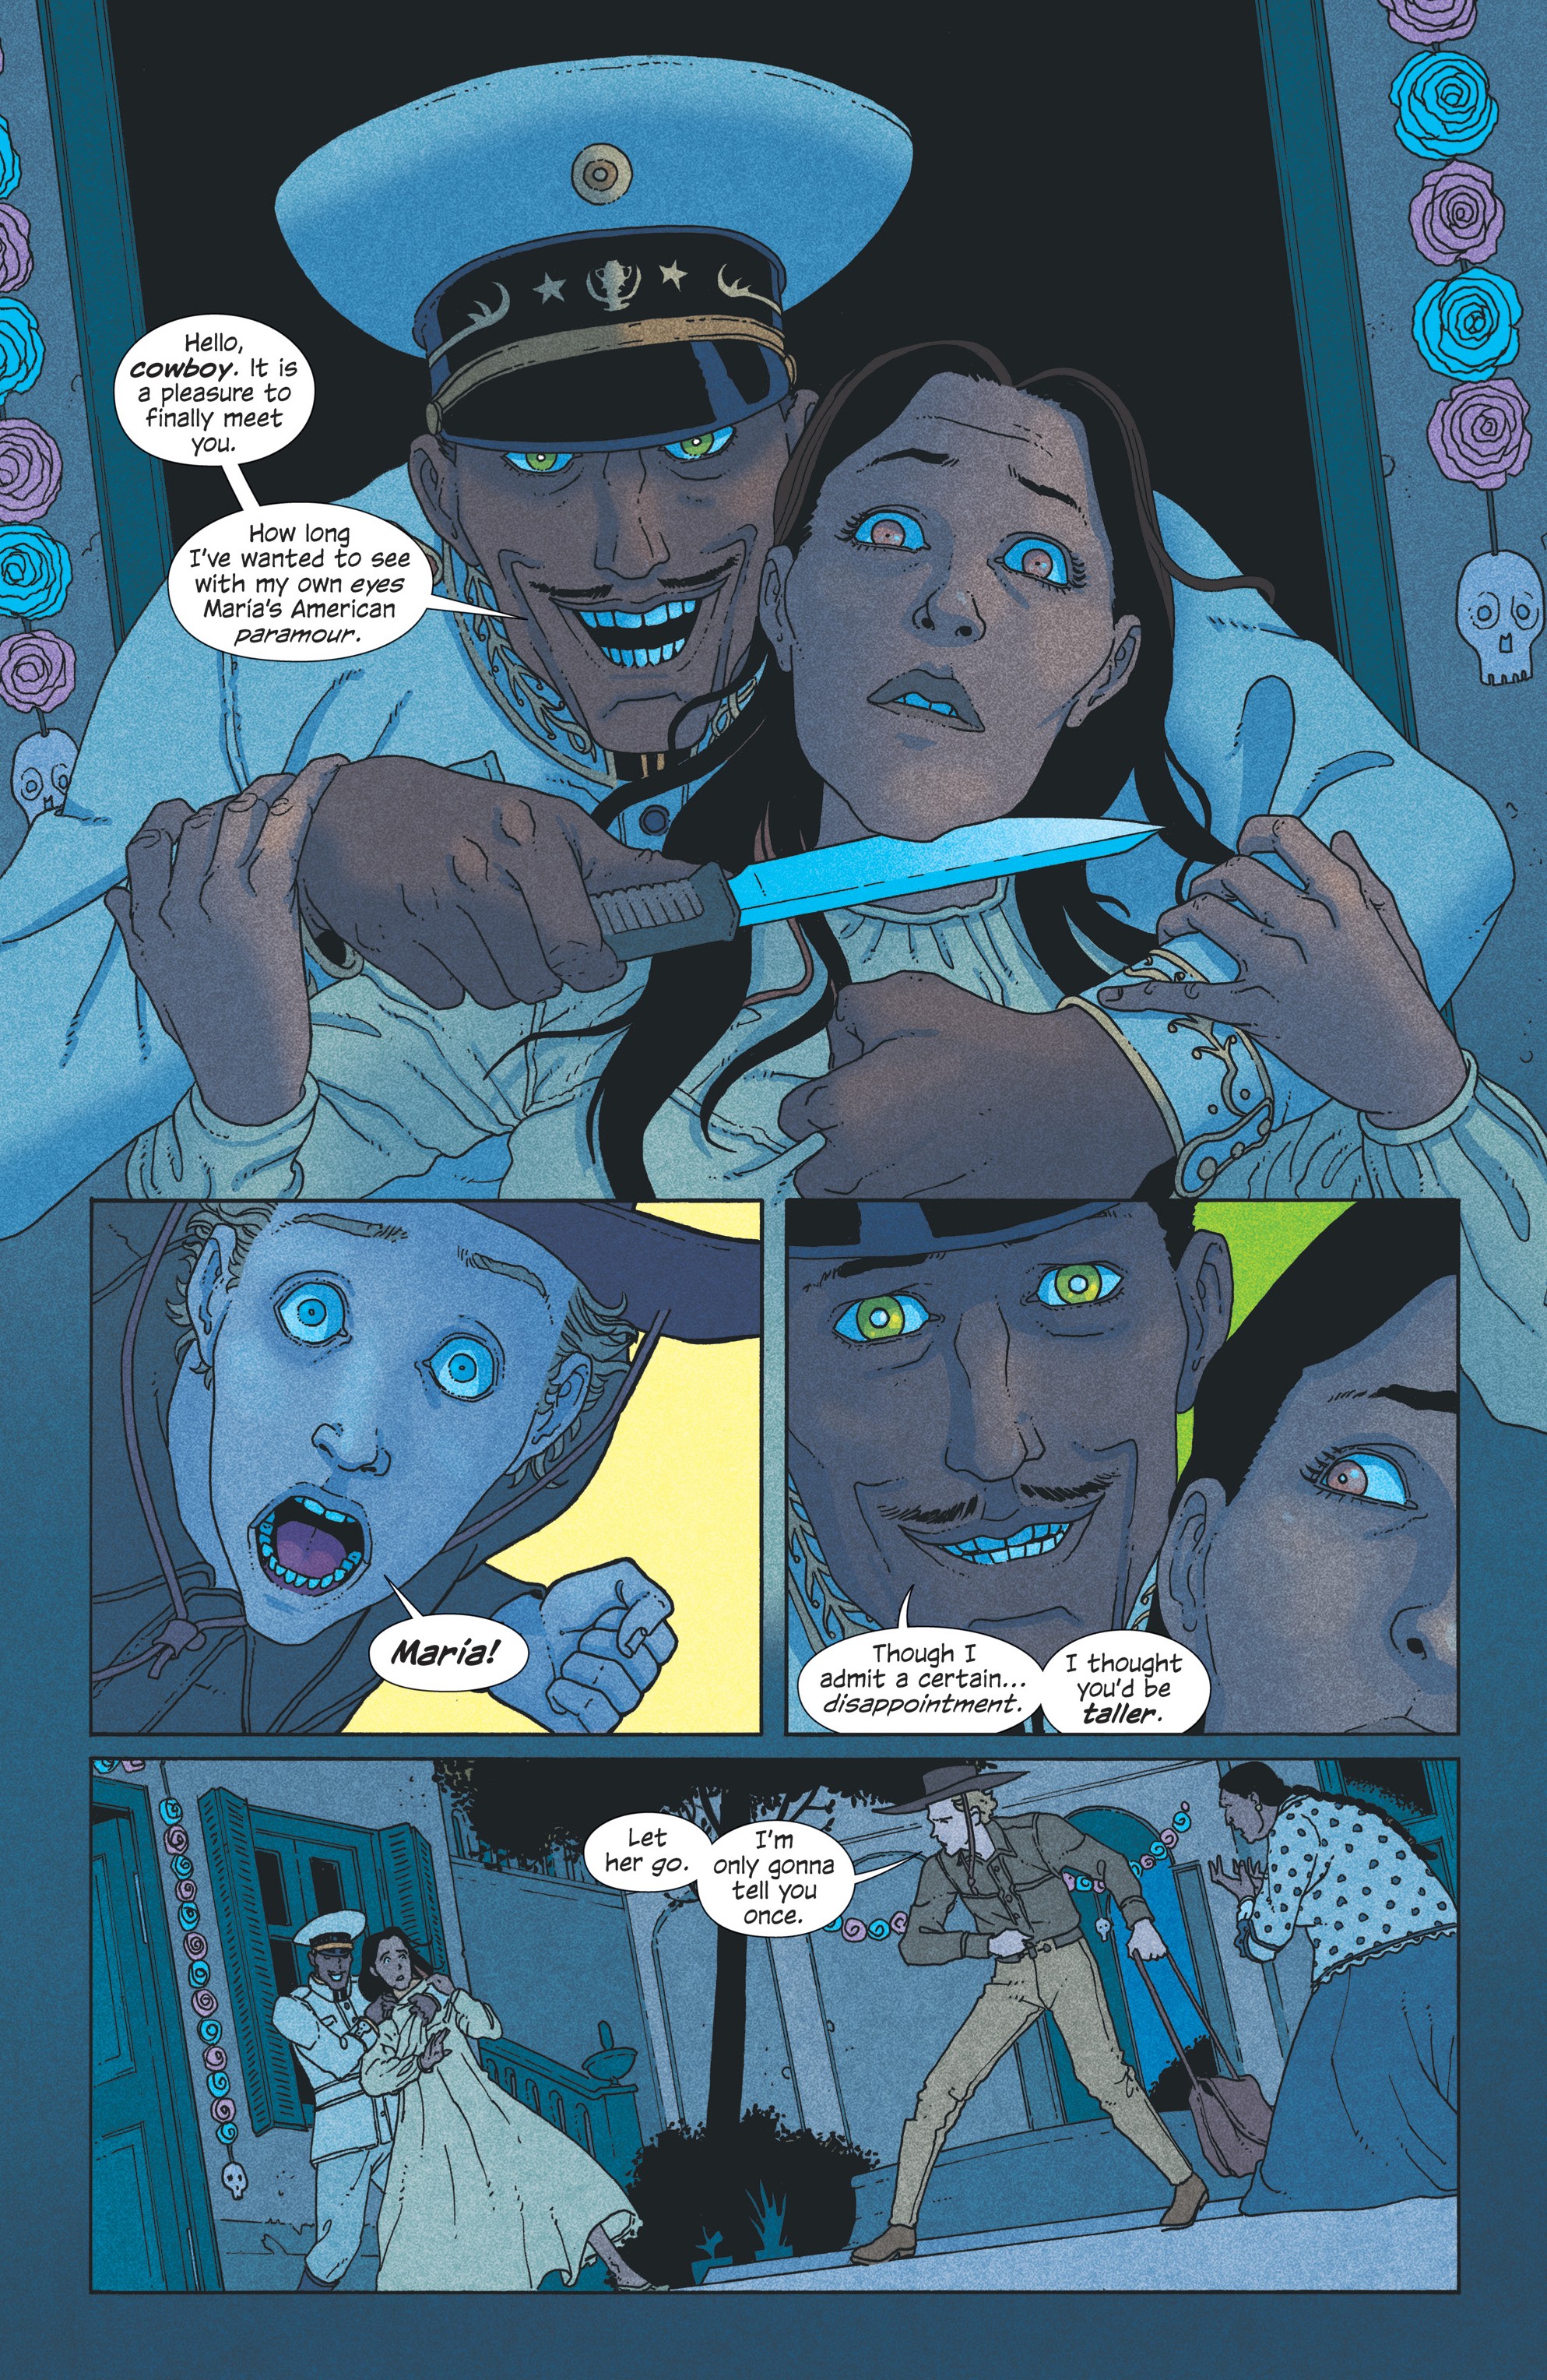 Ice Cream Man Issue 10 Read Ice Cream Man Issue 10 Comic Online In High Quality Read Full Comic Online For Free Read Comics Online In High Quality